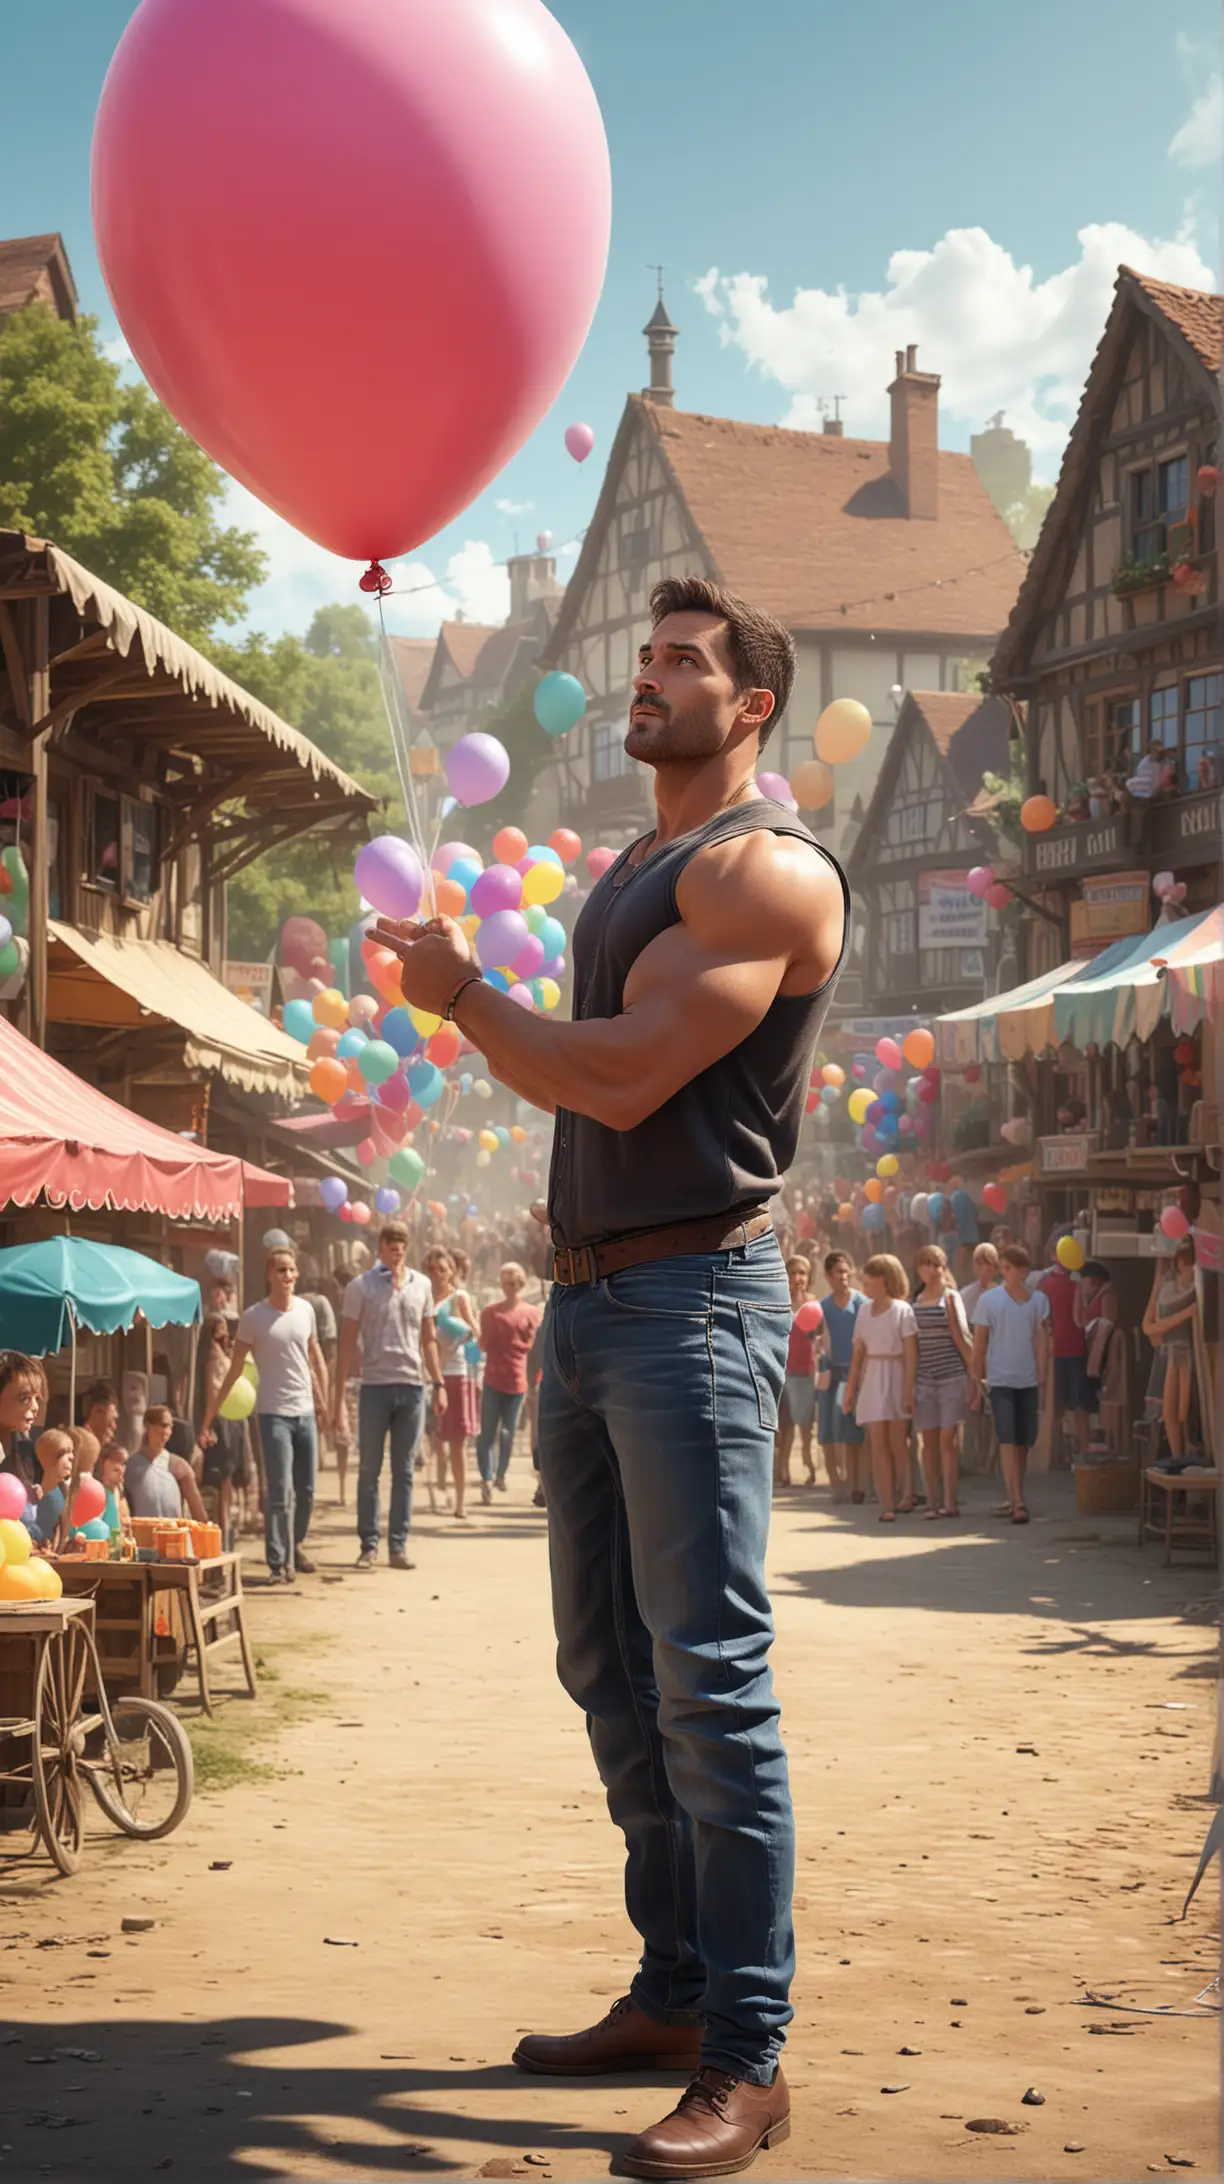 An attractive, highly muscular man in his 30s, standing with a helium filled balloon blowing maching and he is selling balloons in a village fair. Vector Style. Realistic and impactful. The image captures the village fair background and other kids show interest in buying balloons. Create Spirited, mildly colorful, atmospheric images inspired by noir video games. Use with Vision XL for best results.